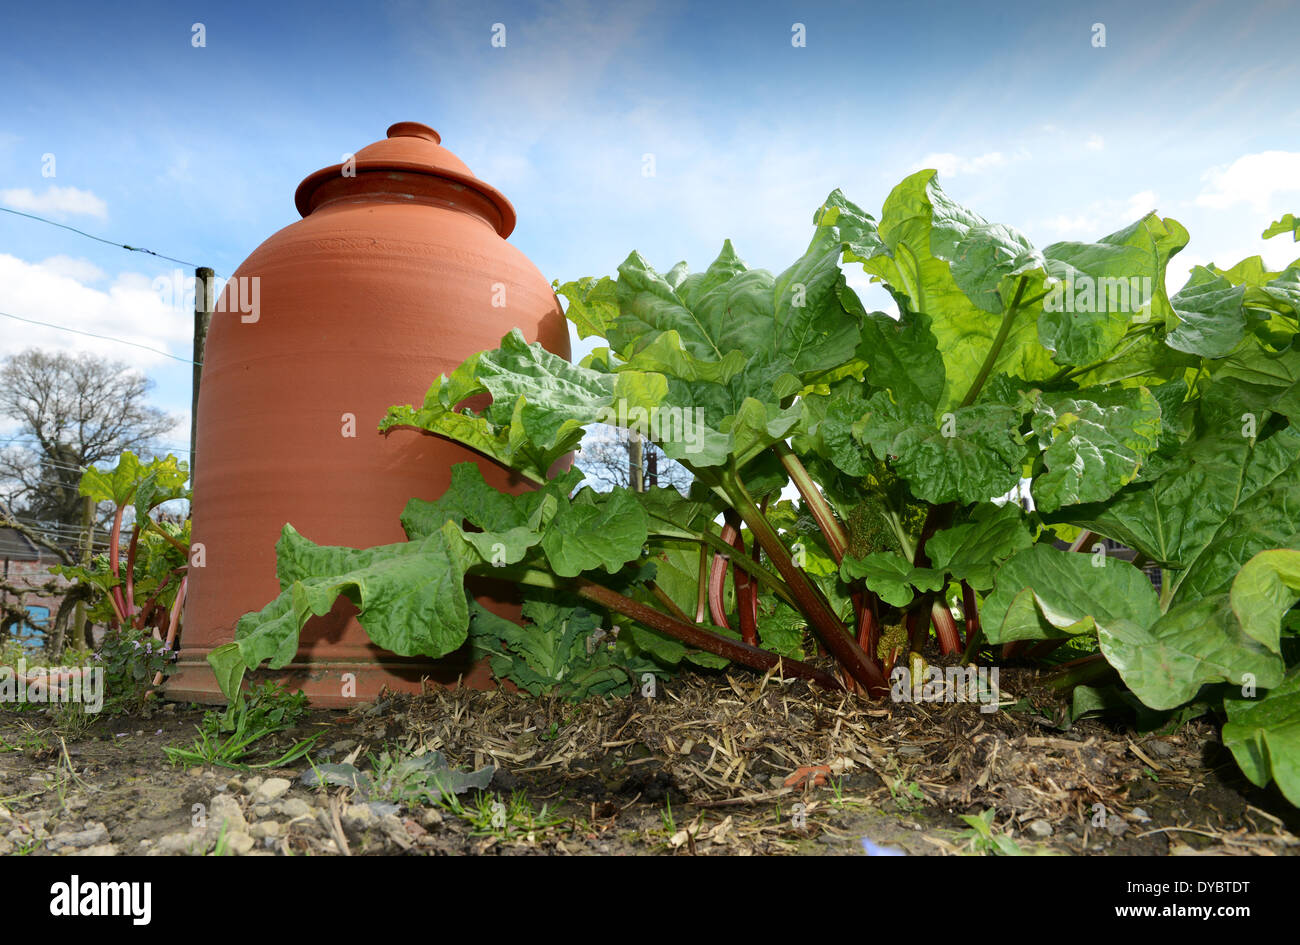 Rhubarb growing with terracotta bell forcer Uk Stock Photo